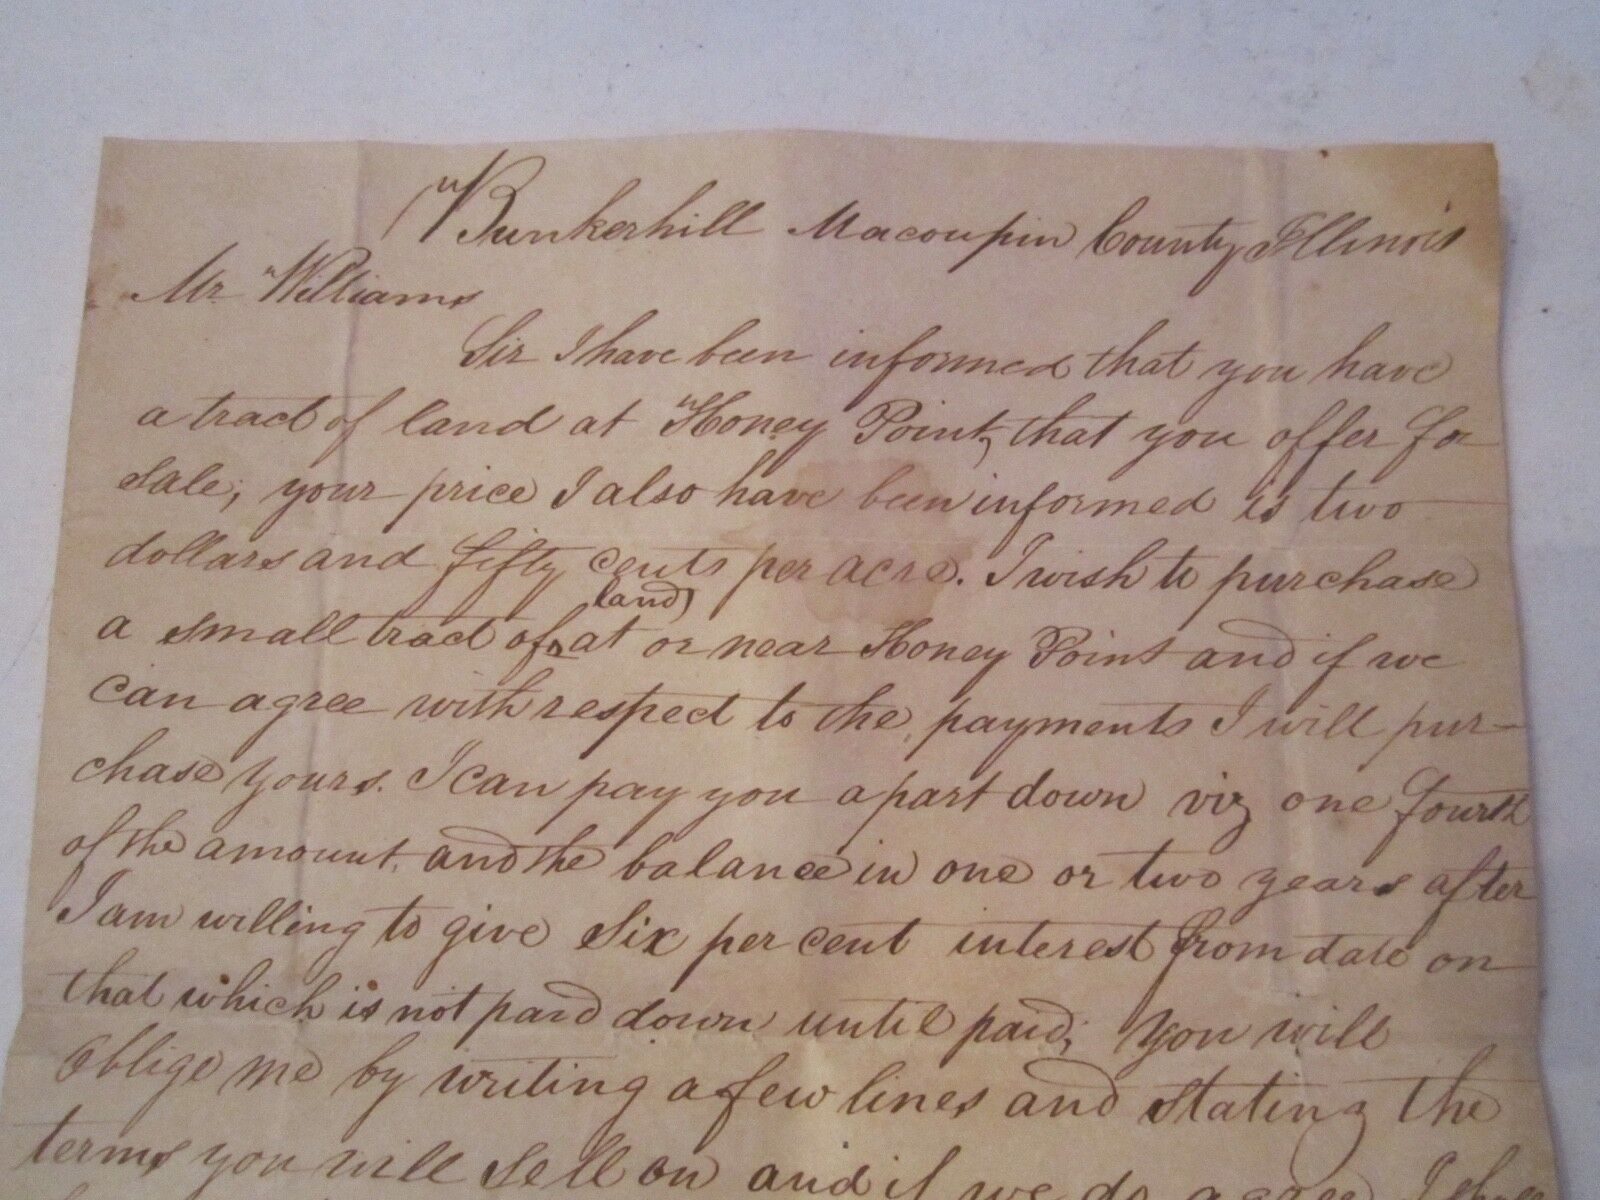 1839 LETTER - THE LETTER IS FOR A PURCHASE OF LAND AT $2.50 PER ACRE - OFC-D